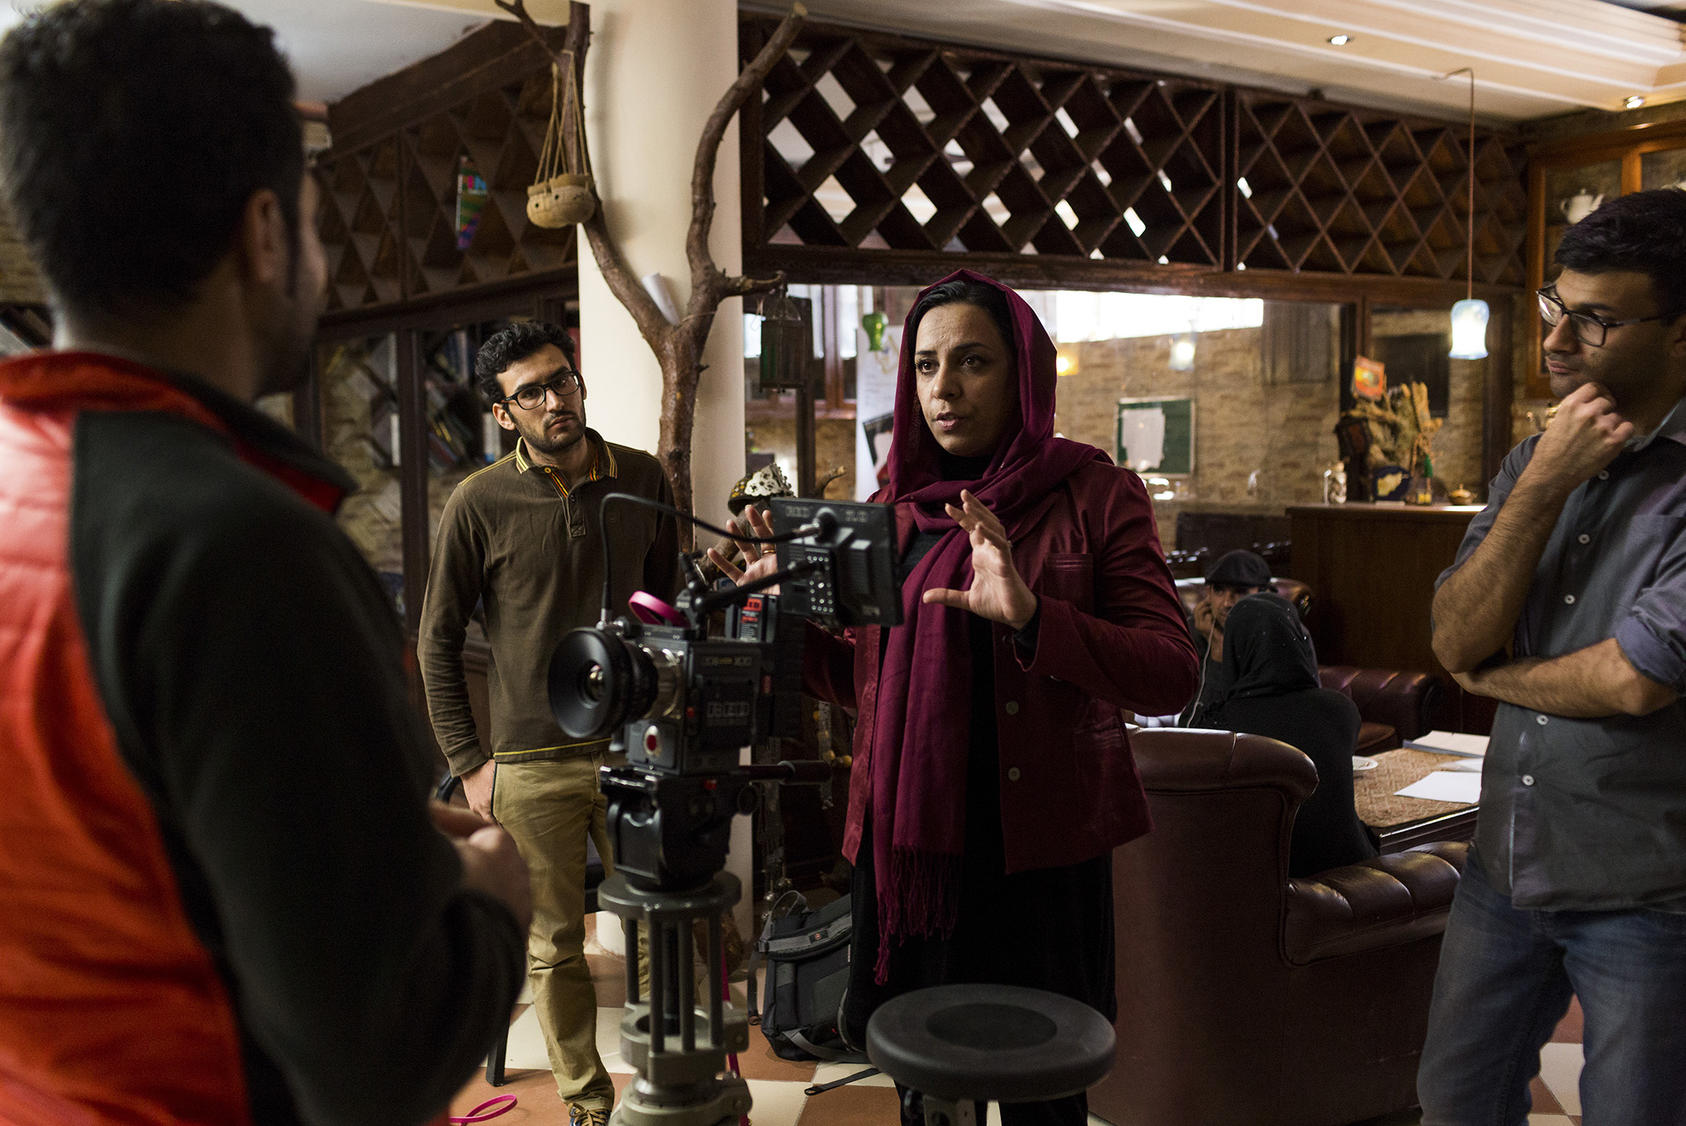 Roya Sadat, center, at a test shoot for a TV drama she directed in Kabul, Oct. 18, 2017. Sadat sold her apartment, car and jewelry to make a movie on women’s rights. It’s Afghanistan’s selection for the Oscars now. (Jim Huylebroek/The New York Times)